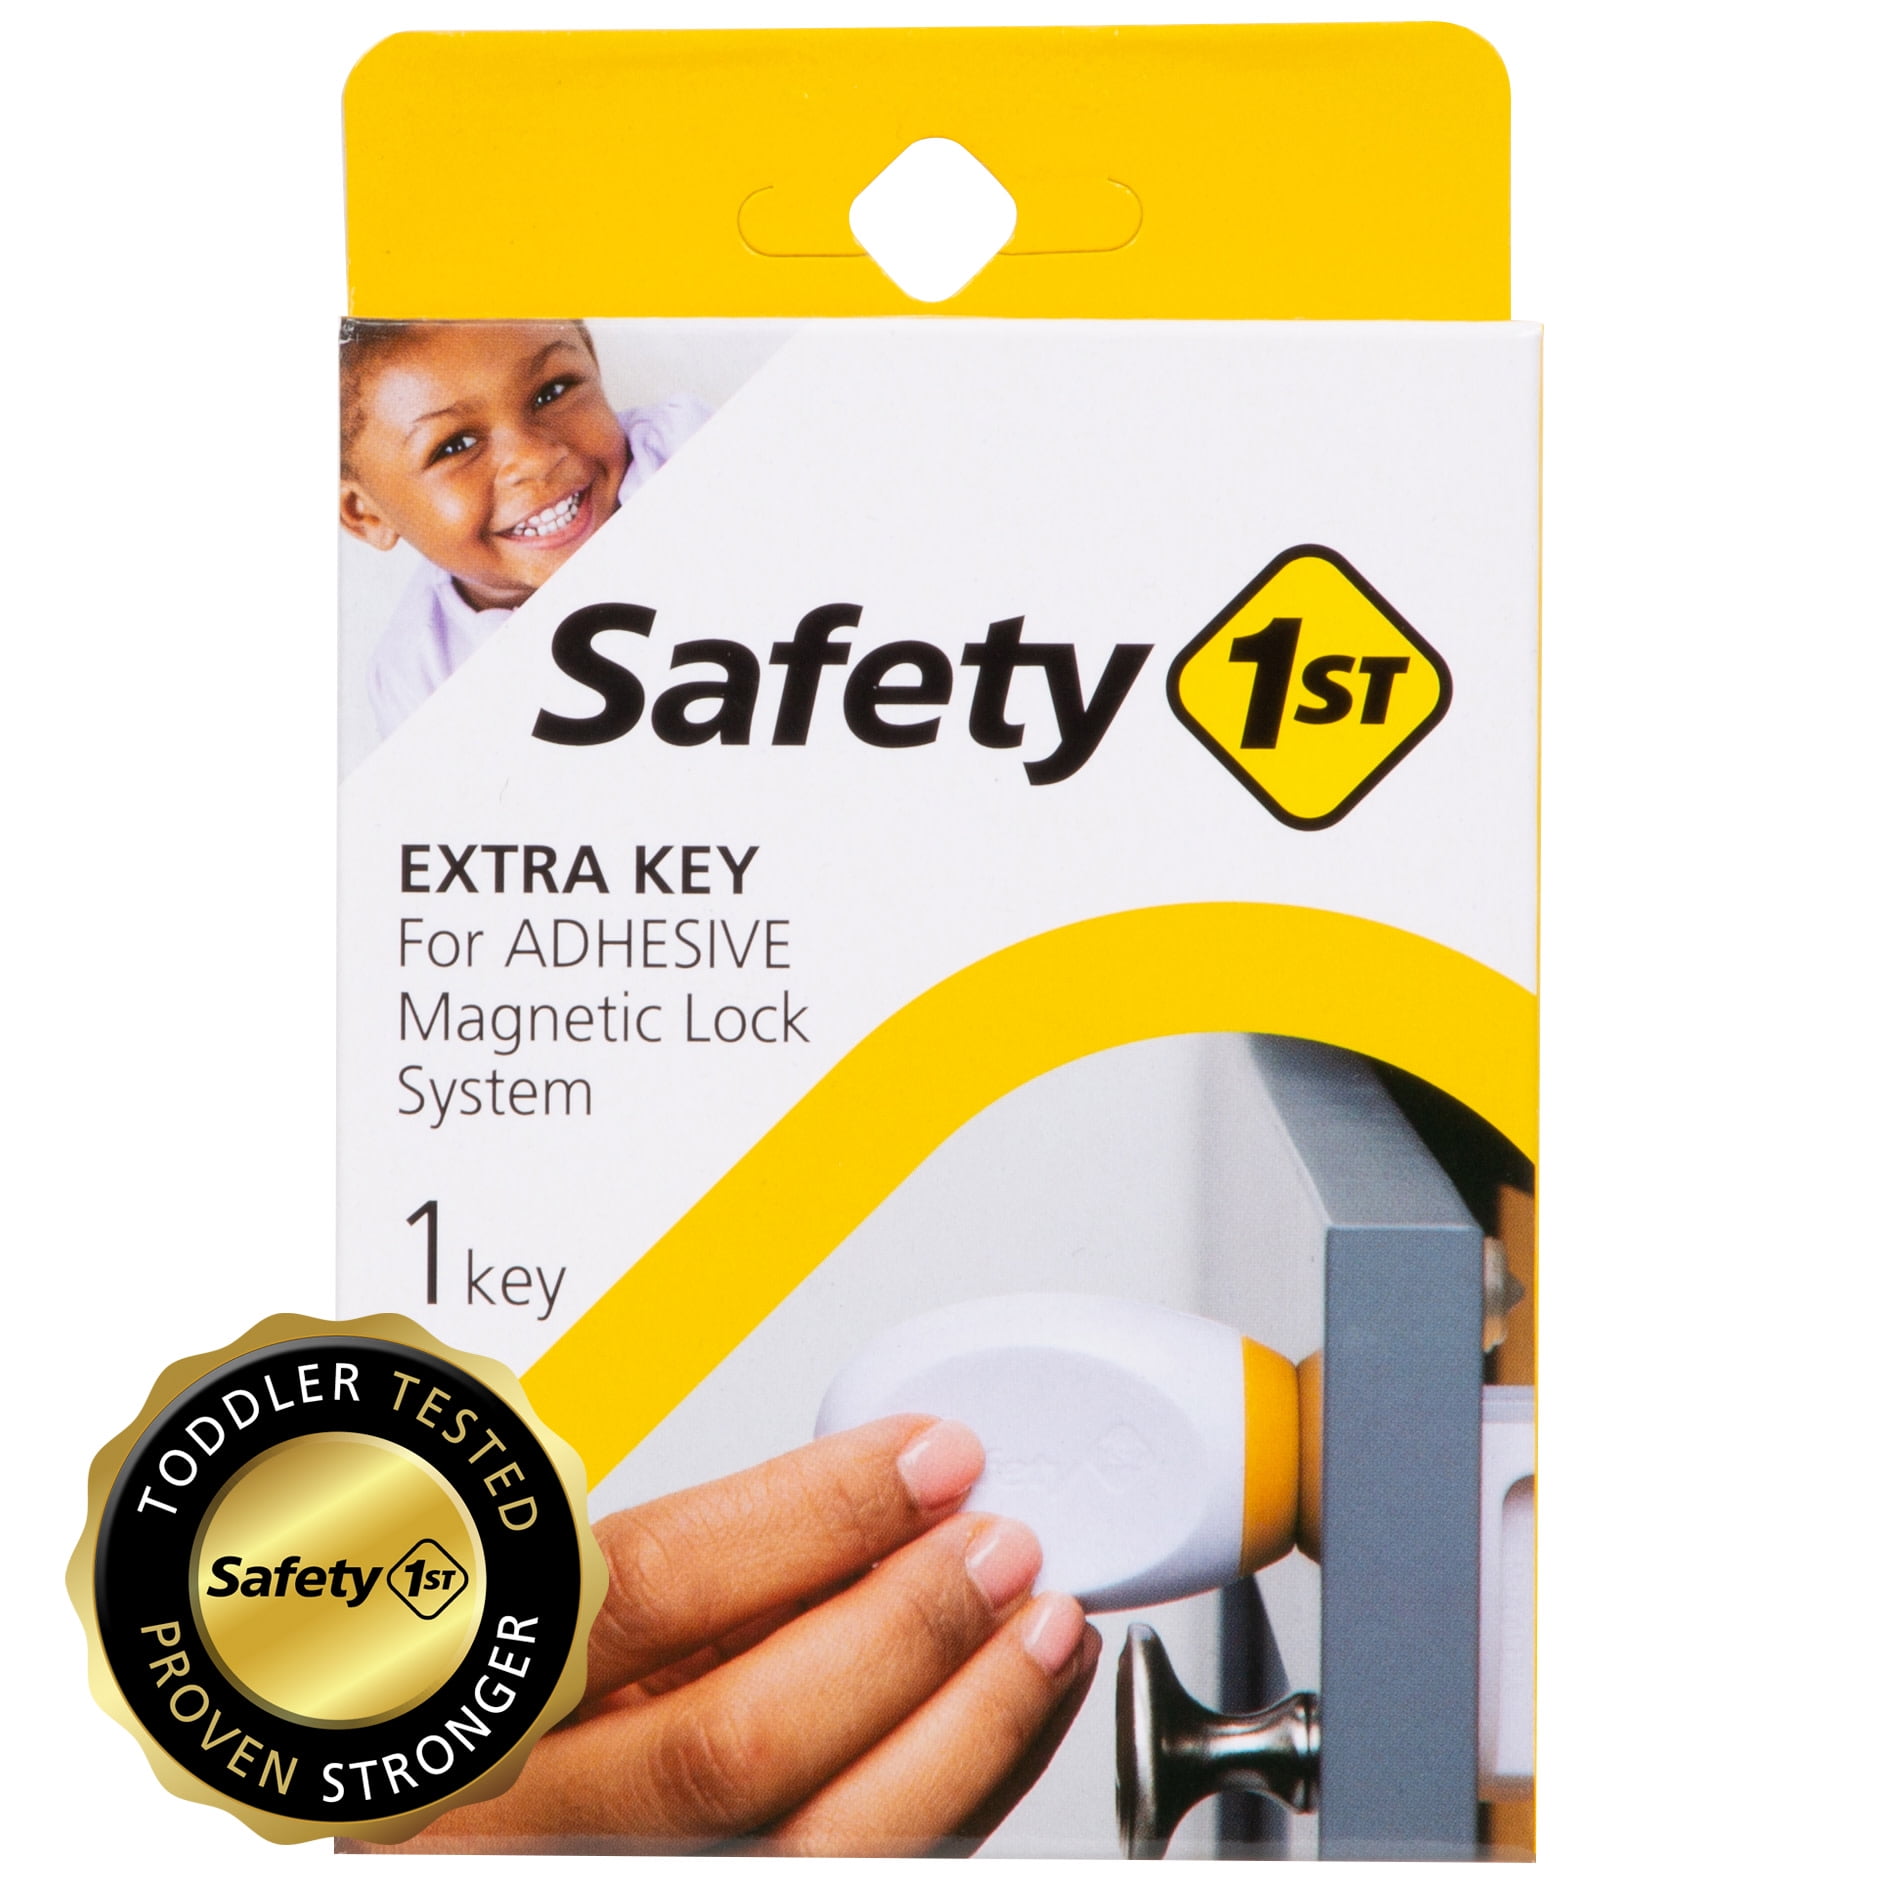 Safety 1st Magnetic Complete Locking System 27 Pieces Includes 3 Keys & 24 Locks 